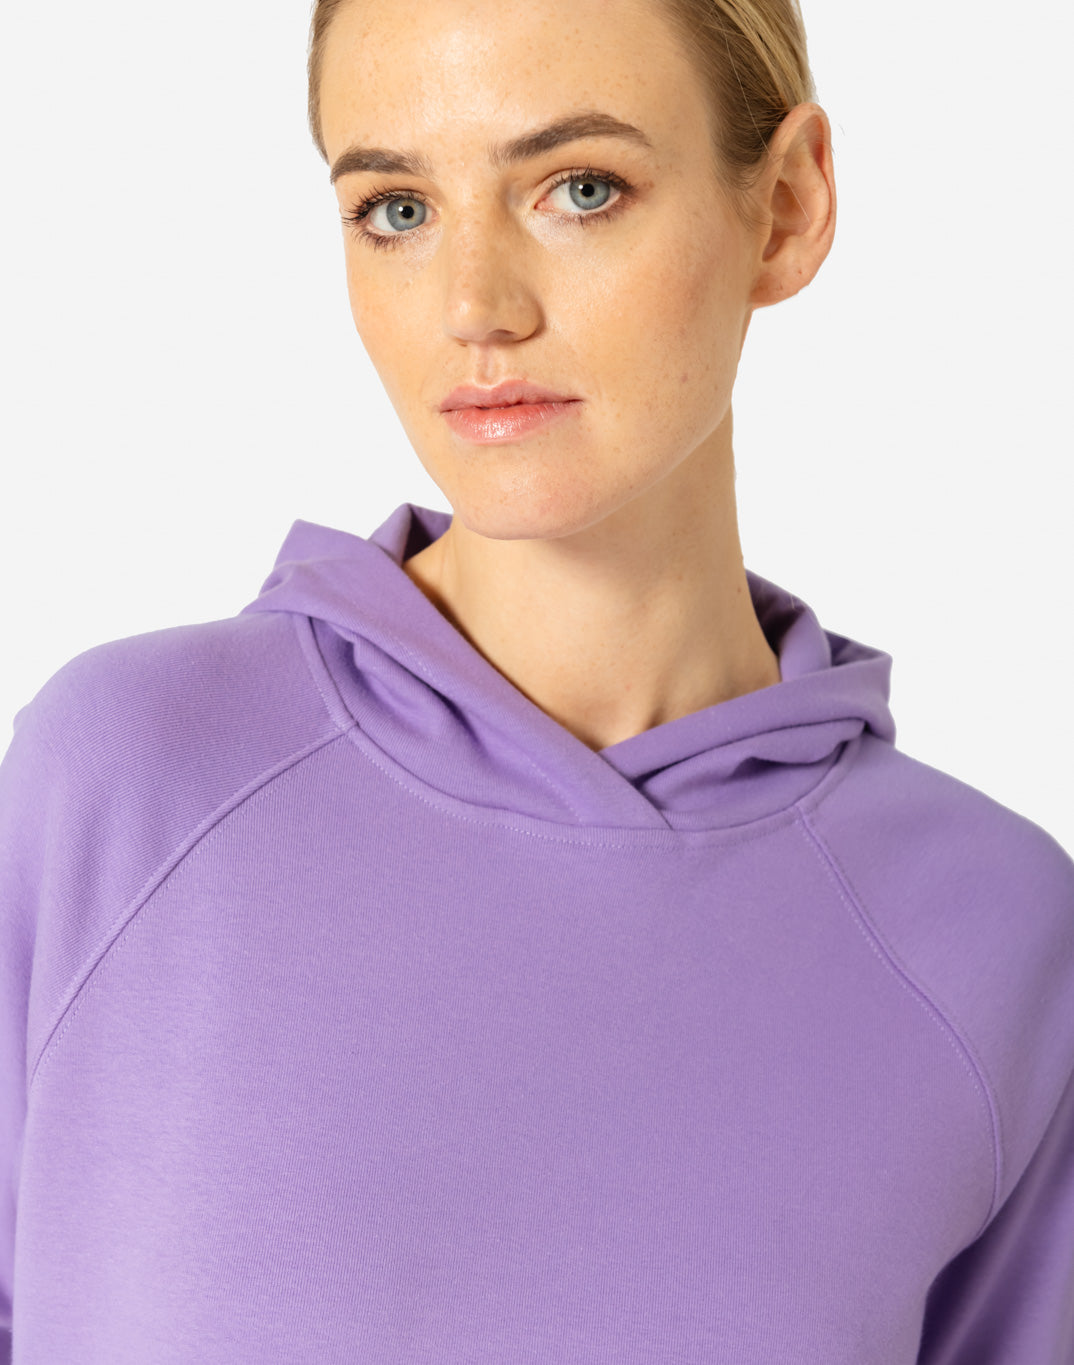 Chill Base Hoodie in Lavender